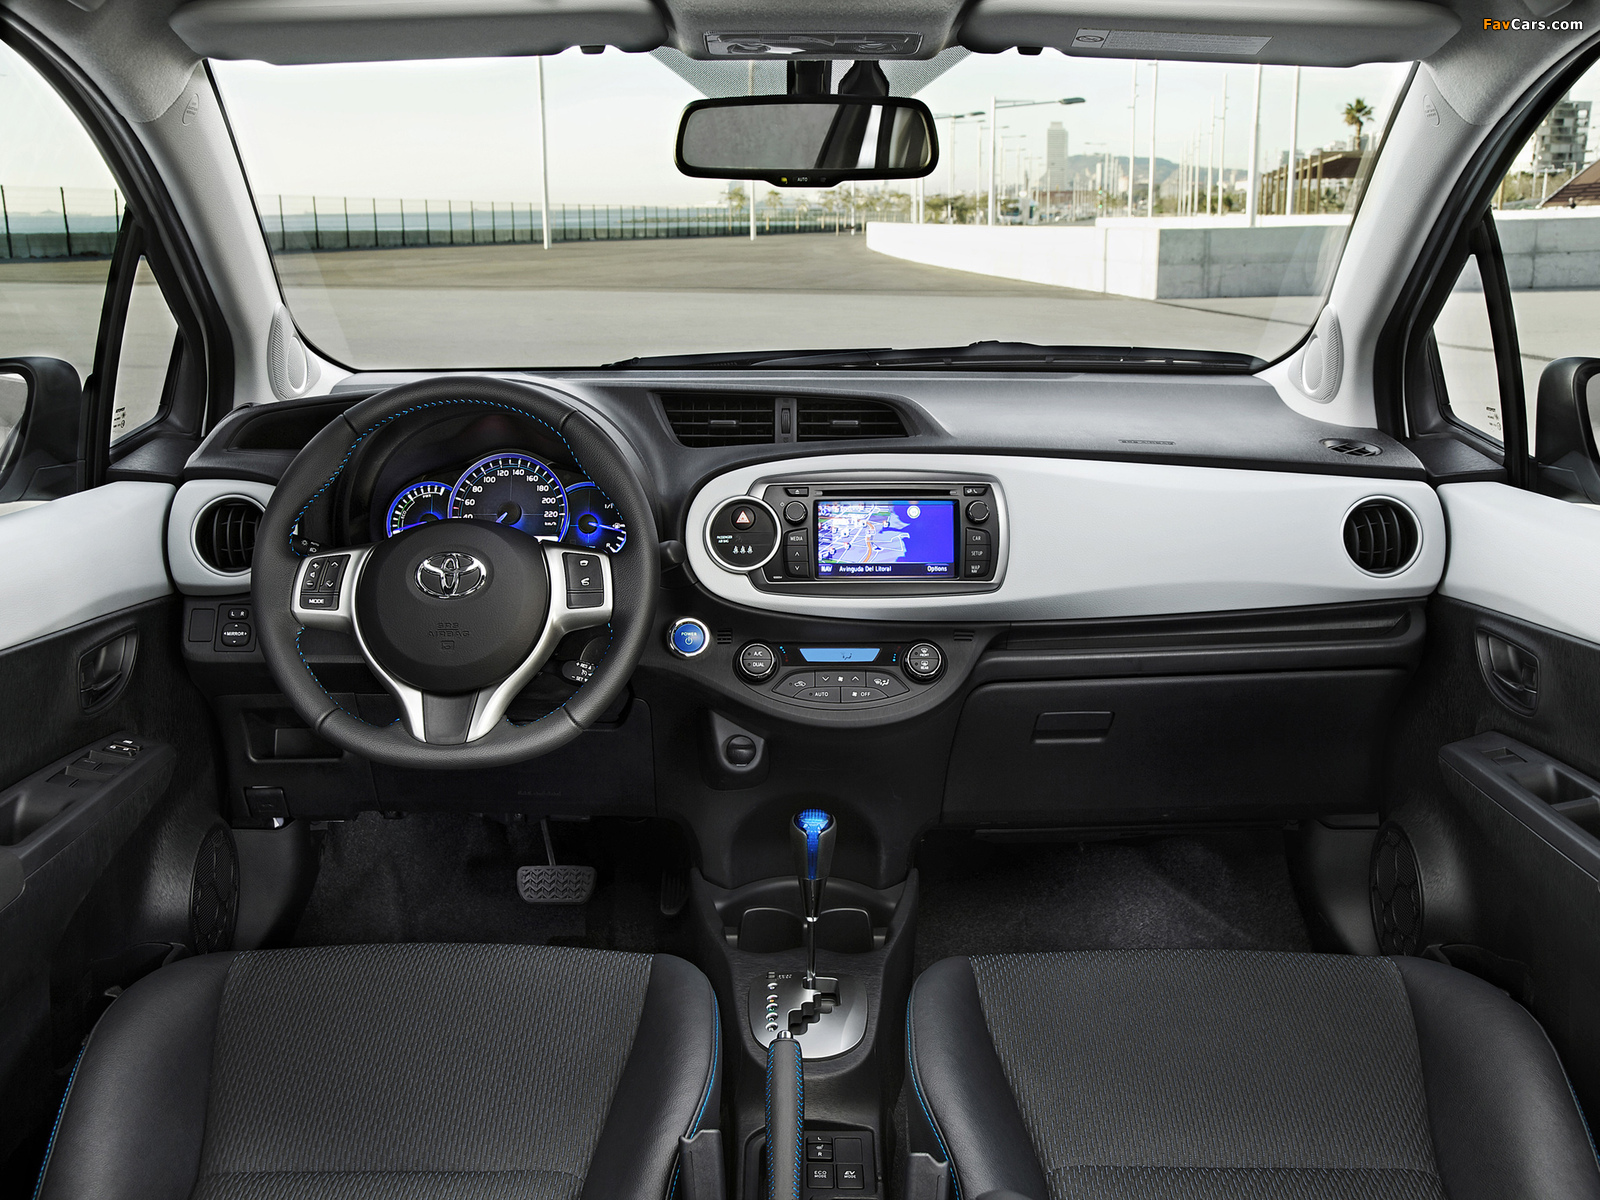 Toyota Yaris Hybrid 2012 pictures (1600 x 1200)